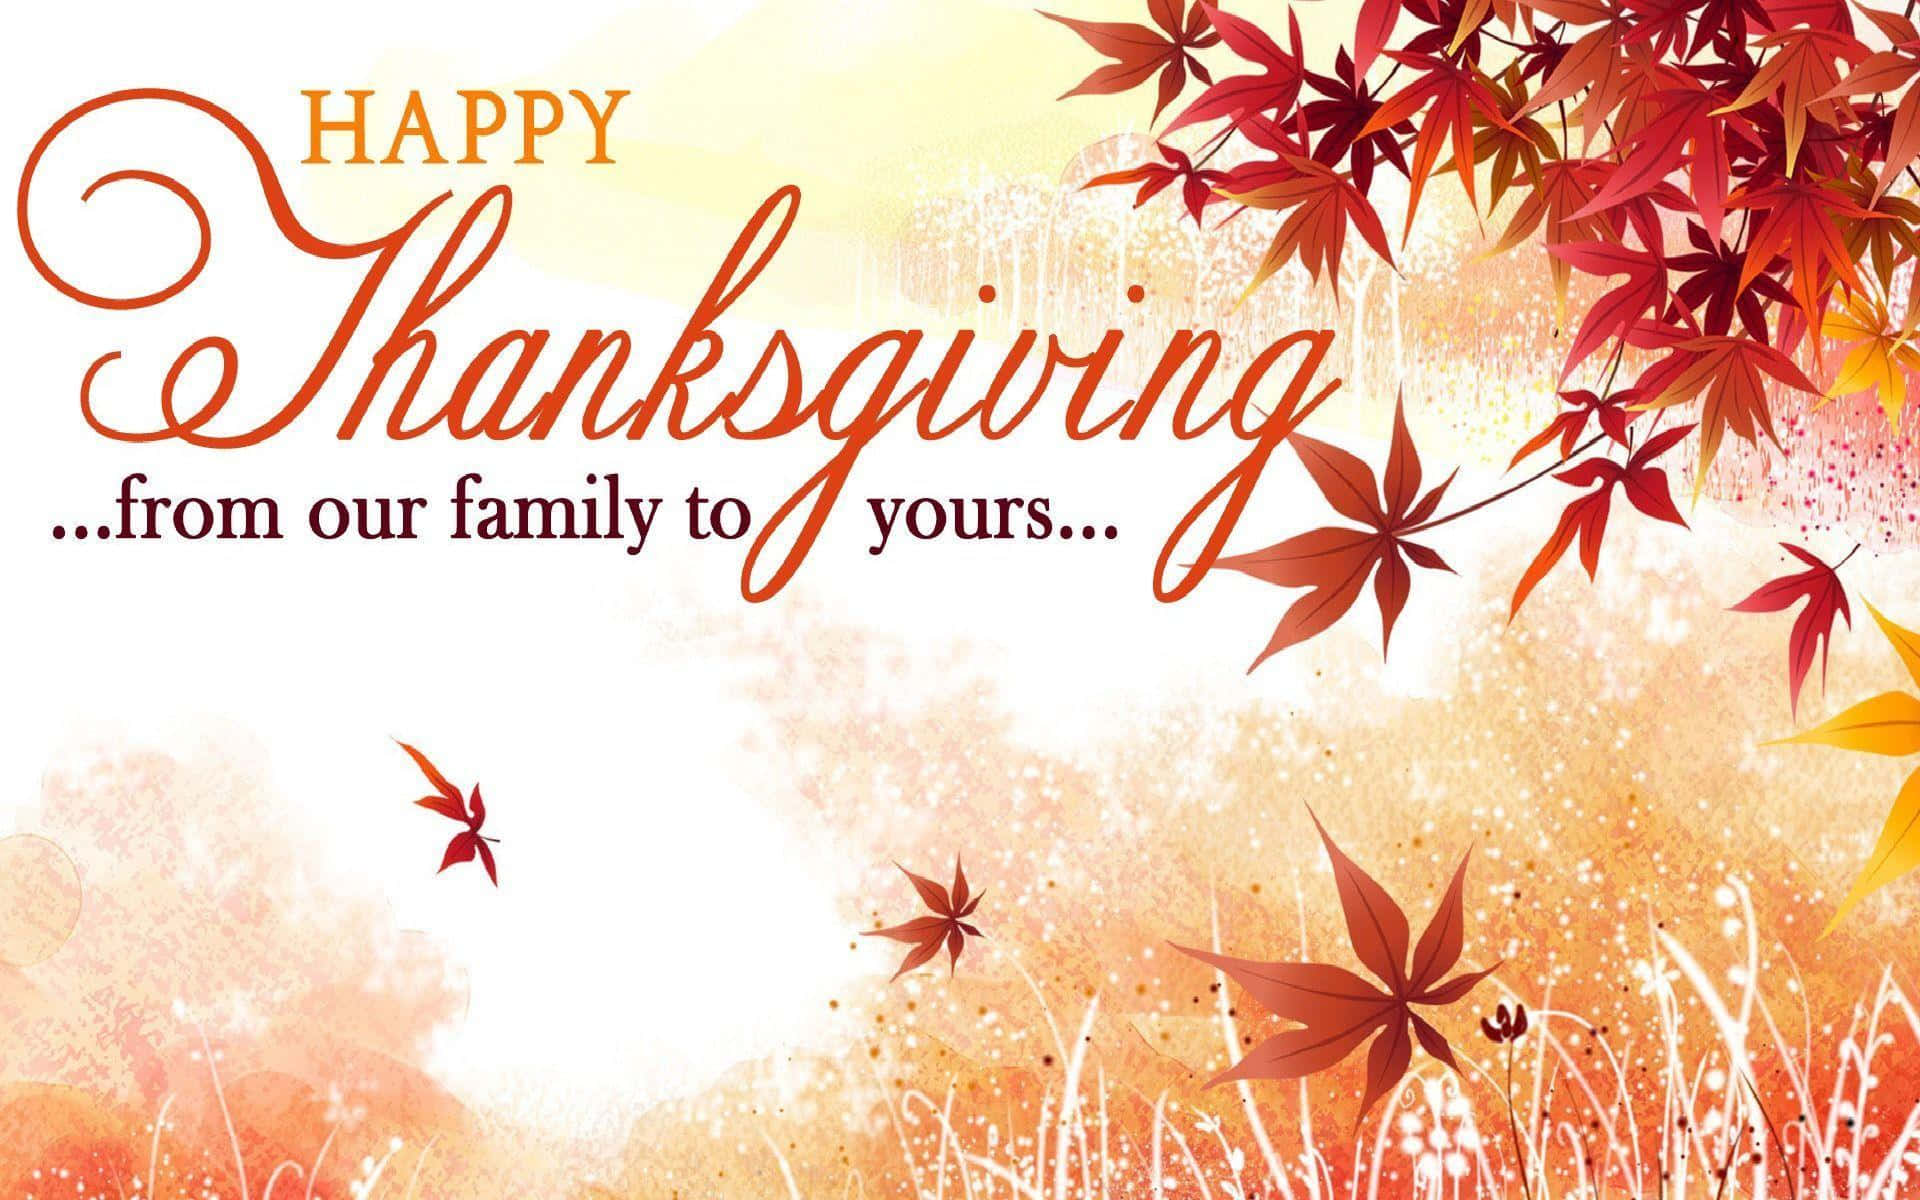 Happy Thanksgiving to all!